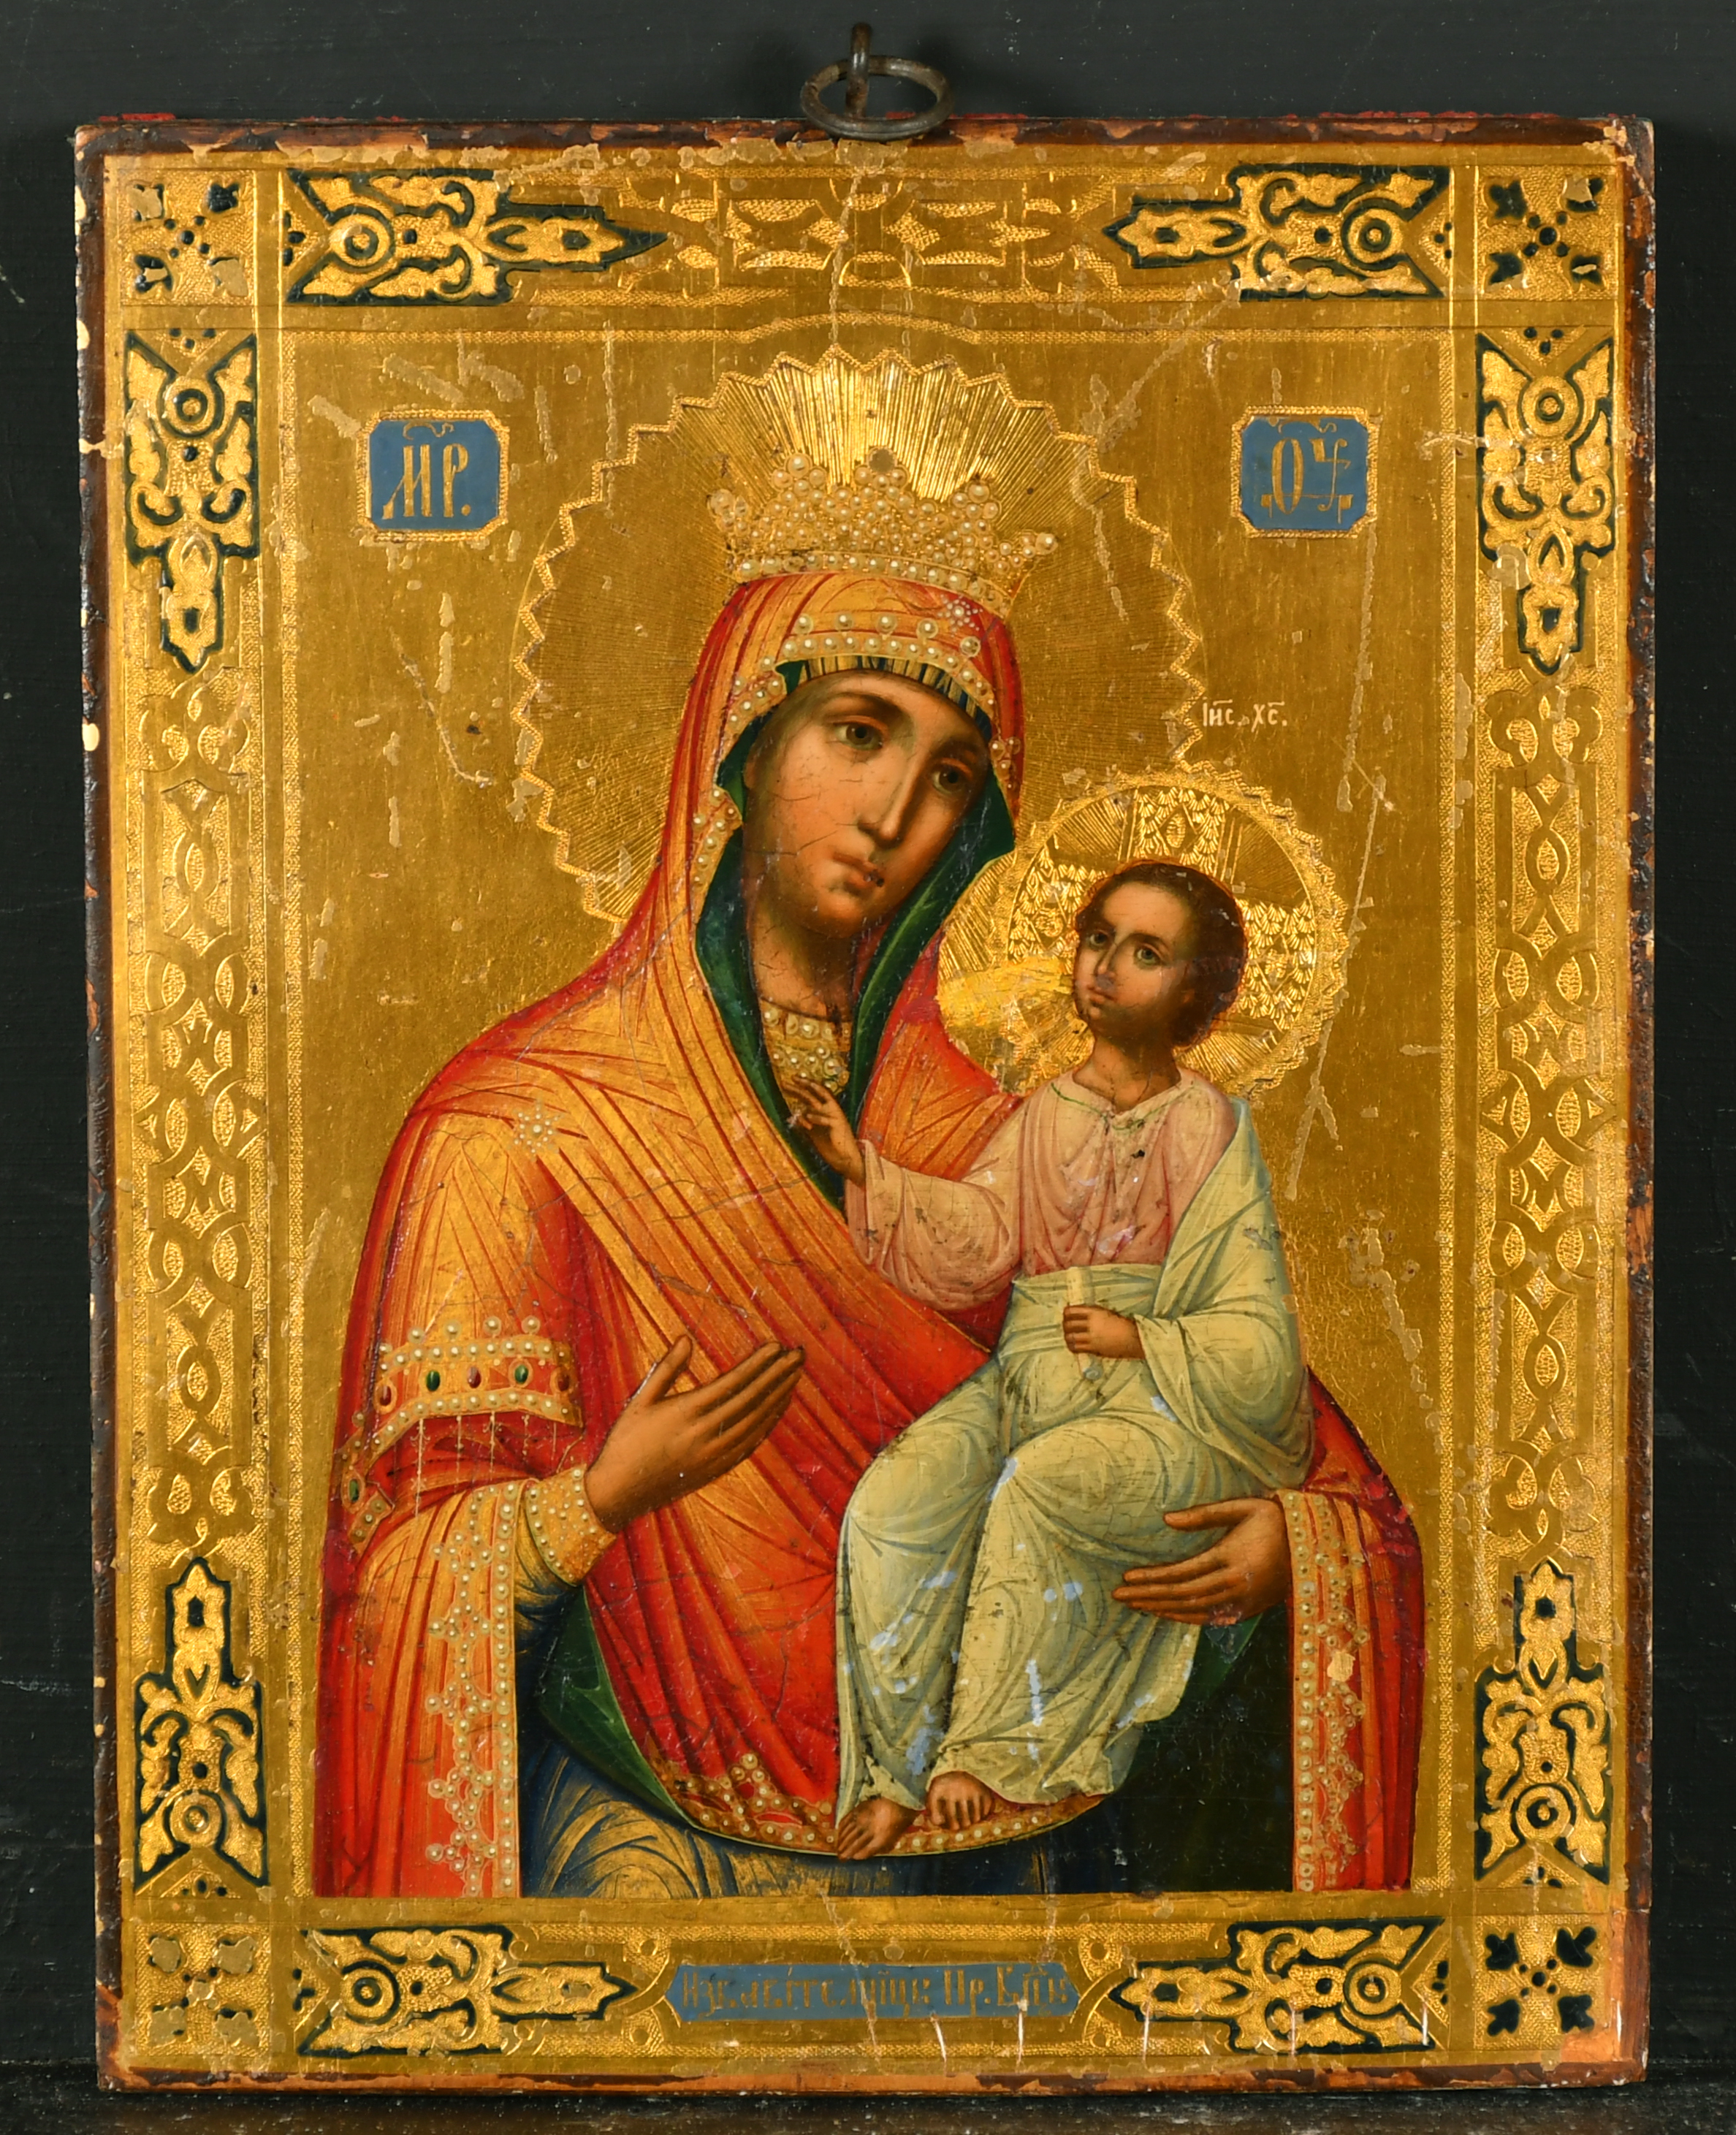 Late 19th Century Russian School. A Madonna and Child, Icon, Unframed 8.5" x 6.75" (21.6 x 17.2cm) - Image 2 of 3